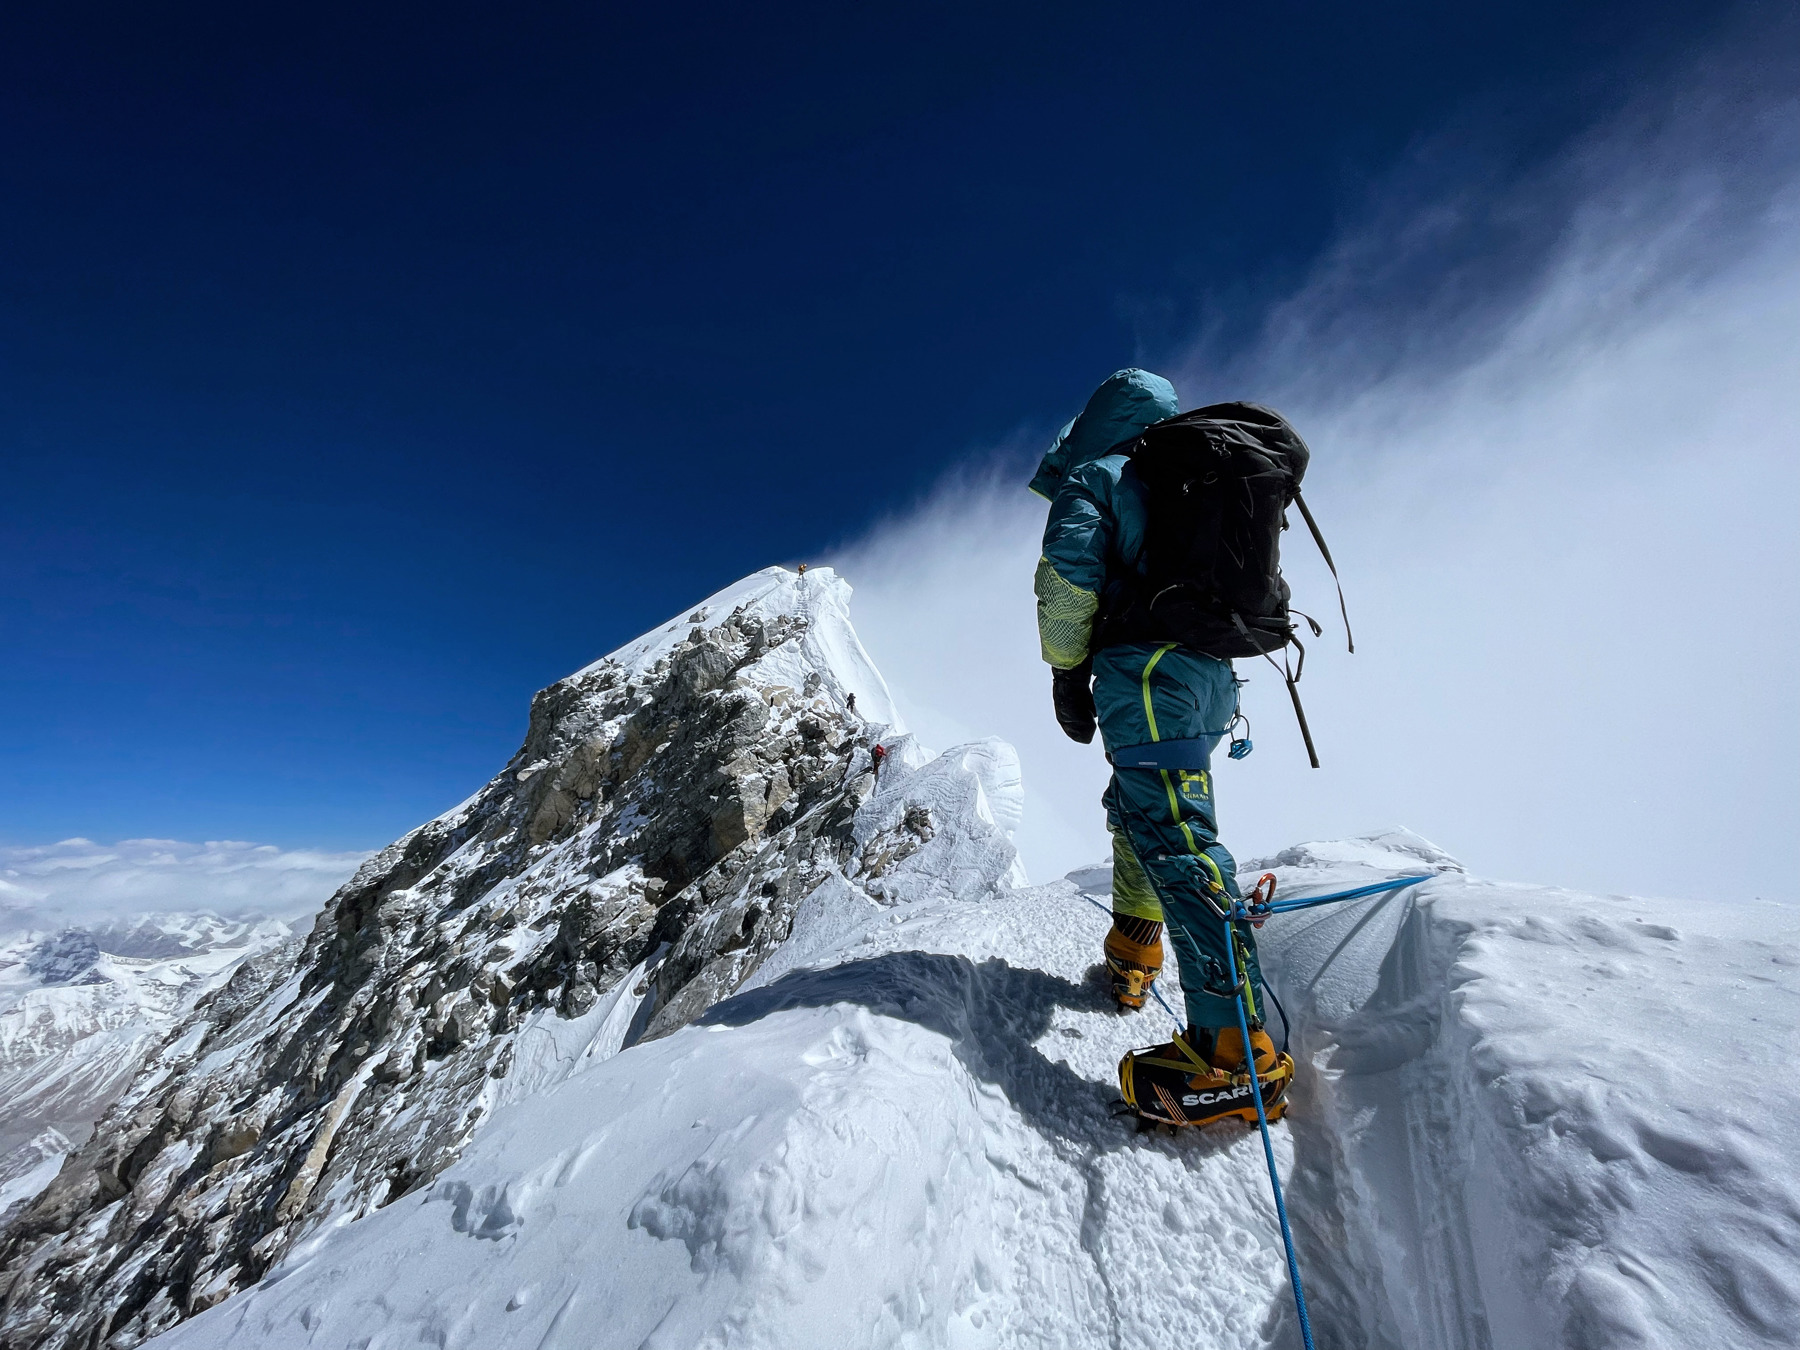 Kirsty has her back to us and is close to the top of Mount Everest. She has a black rucksack on her back, snow boots on, a rope attached to her, her hood up and gloves on. She's looking to the highest point of Everest with clouds to her right and a bright blue sky.